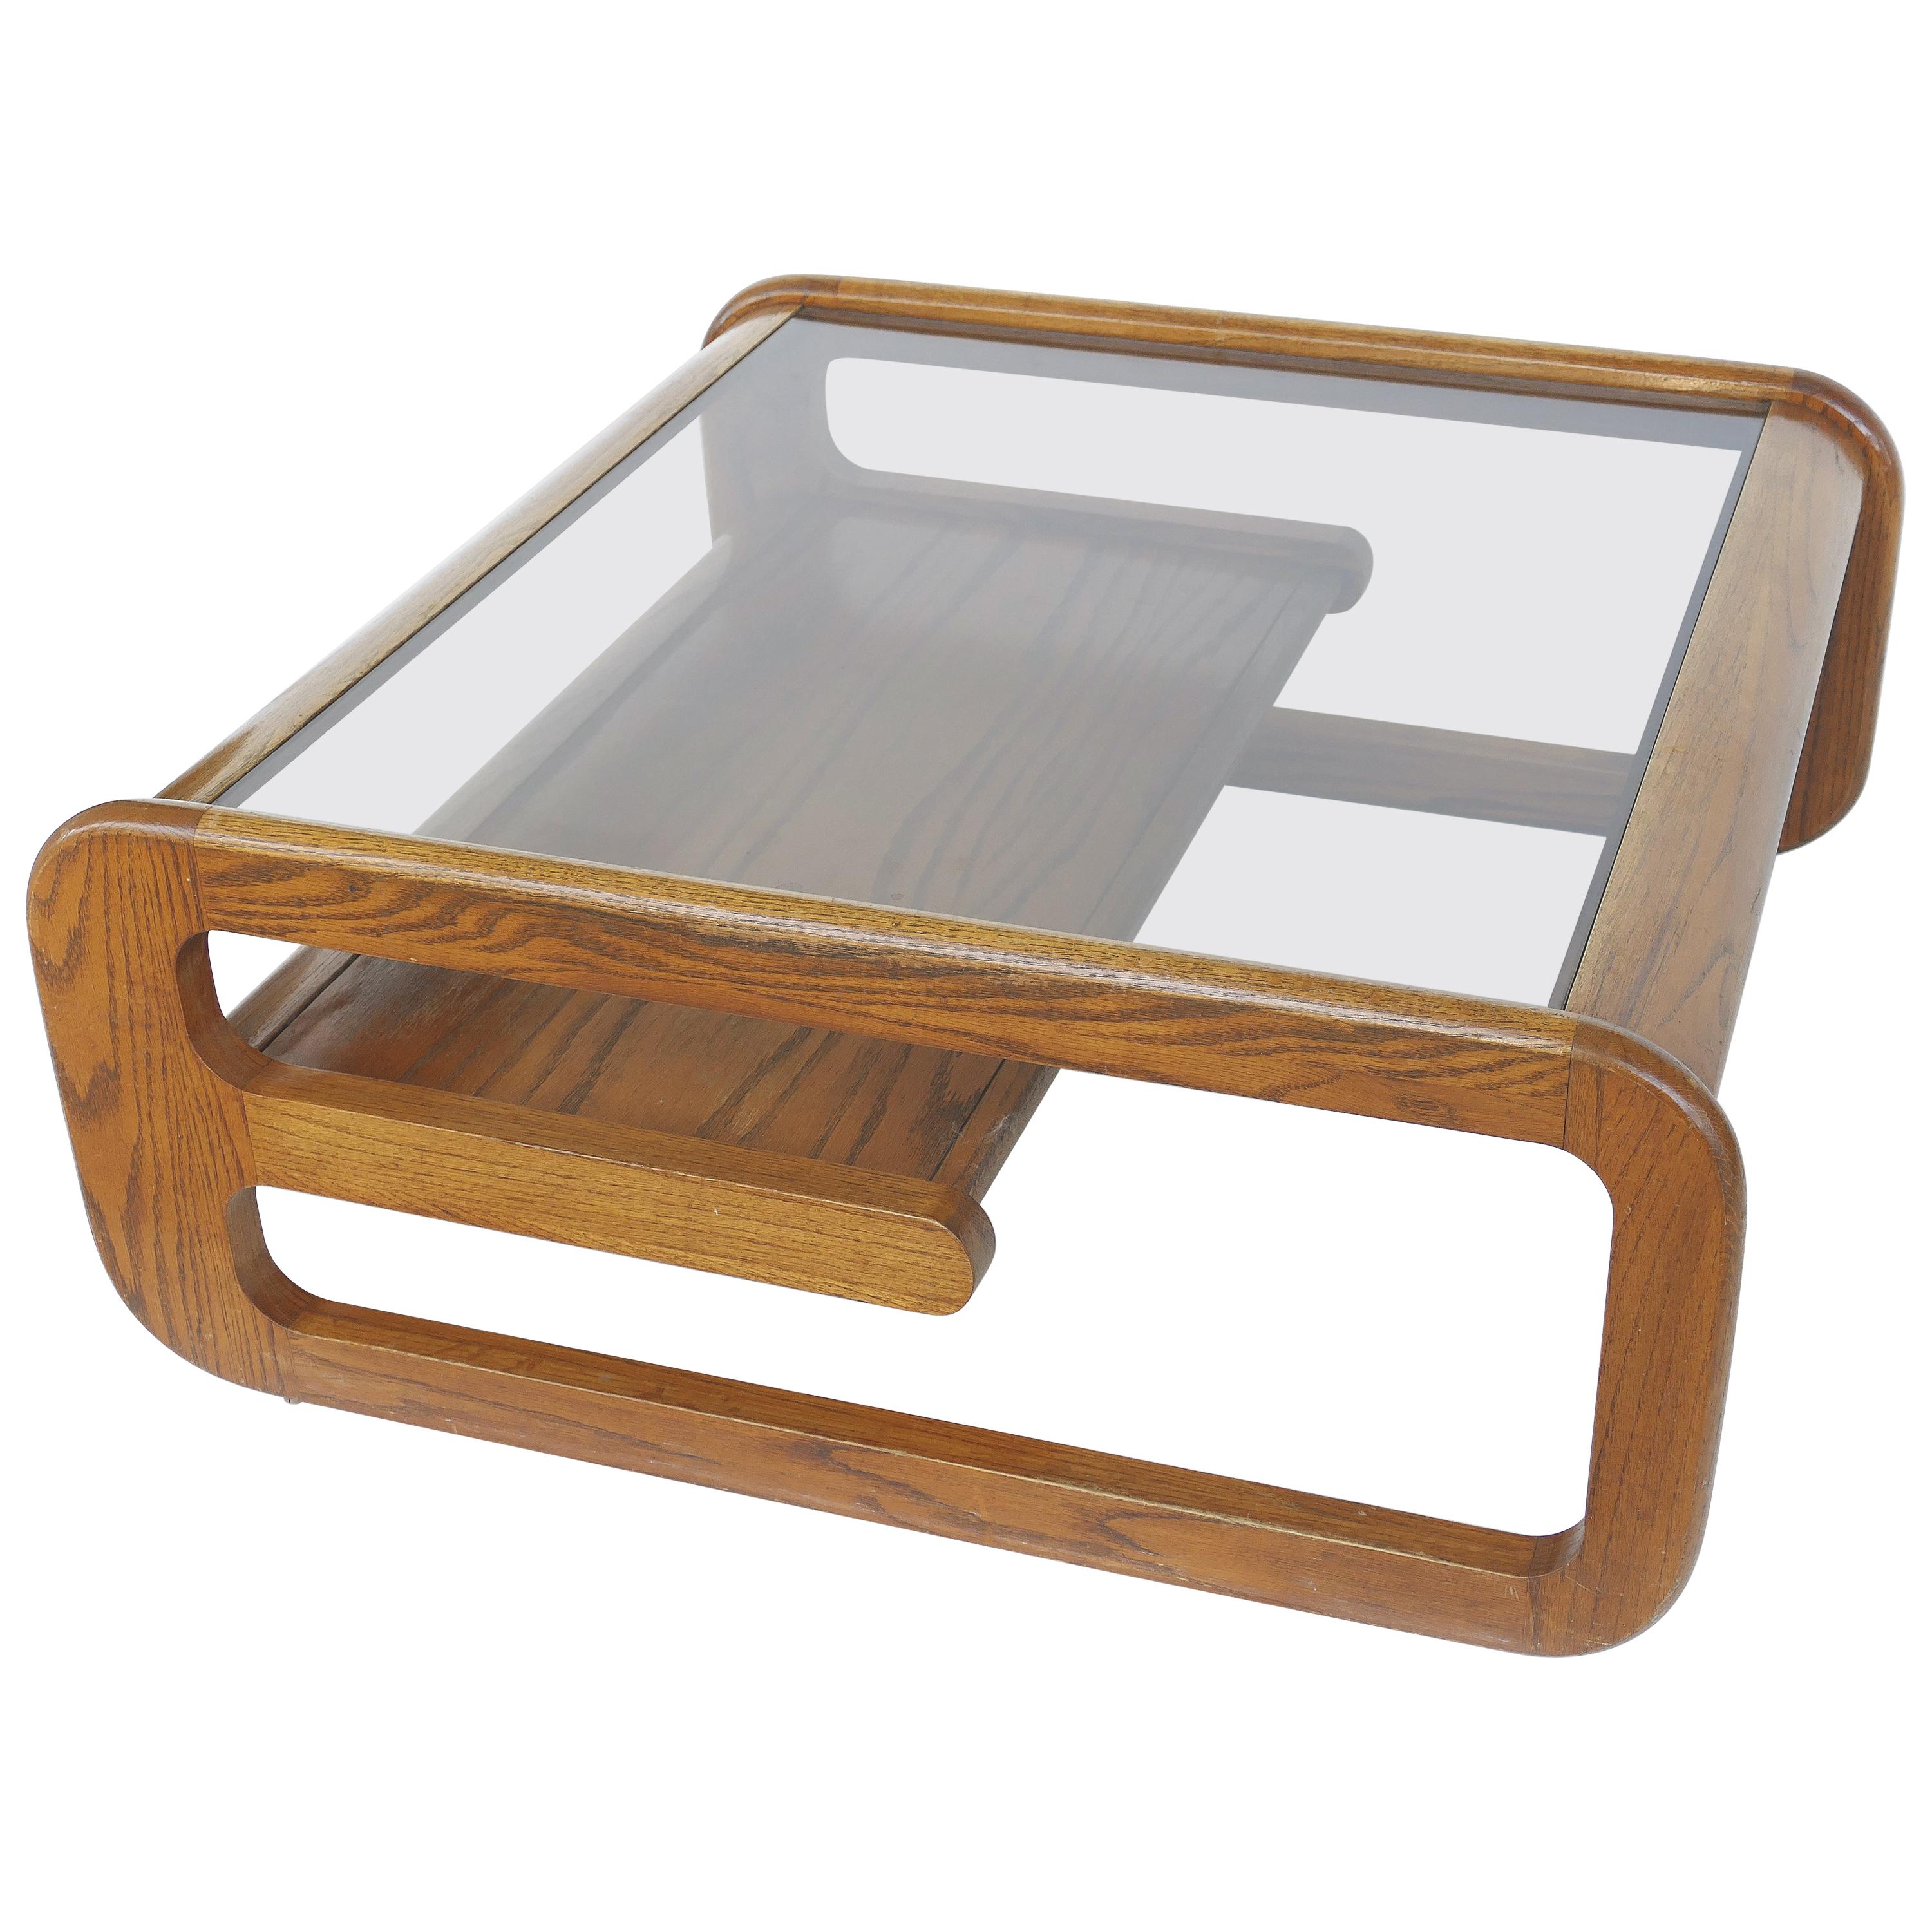 Lou Hodges Mid-Century Modern Coffee Table with Inset Glass